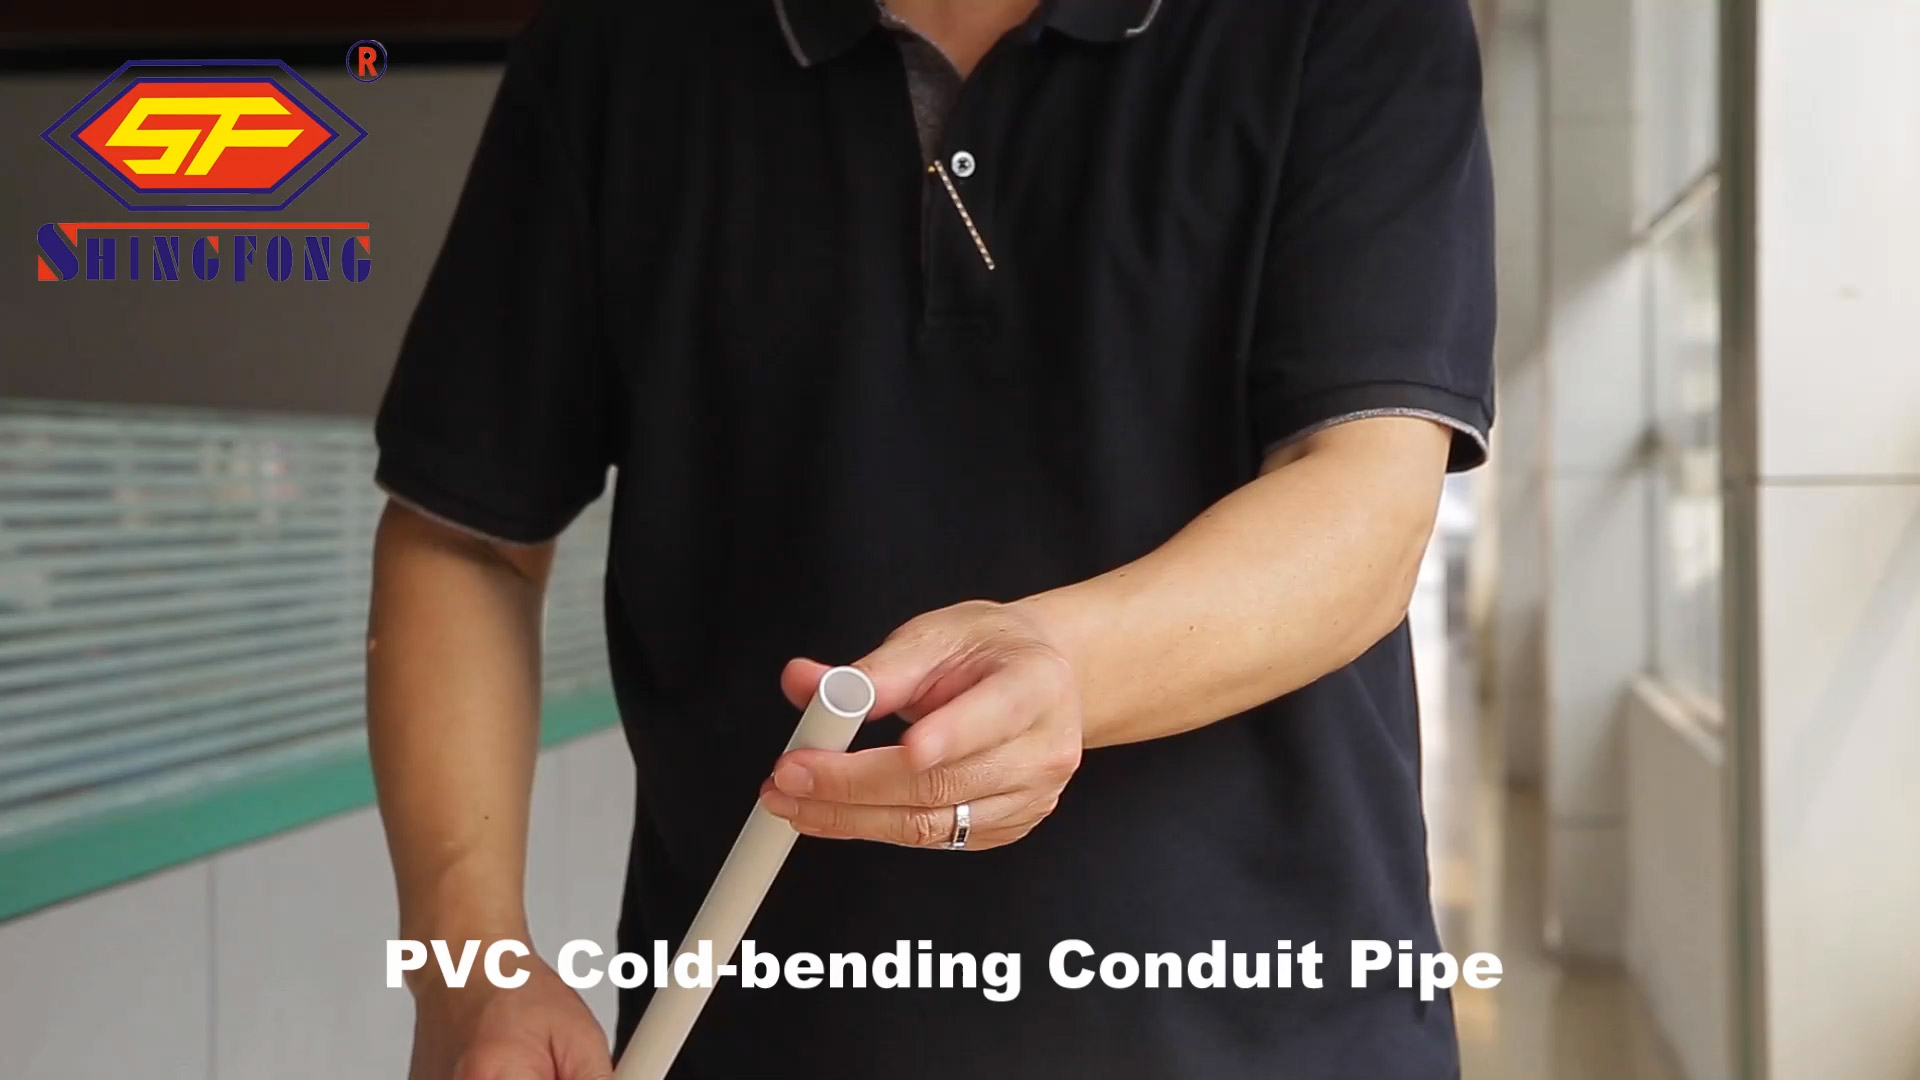 Intro to Wholesale PVC Cold-bending Conduit Pipe with good price Shingfong